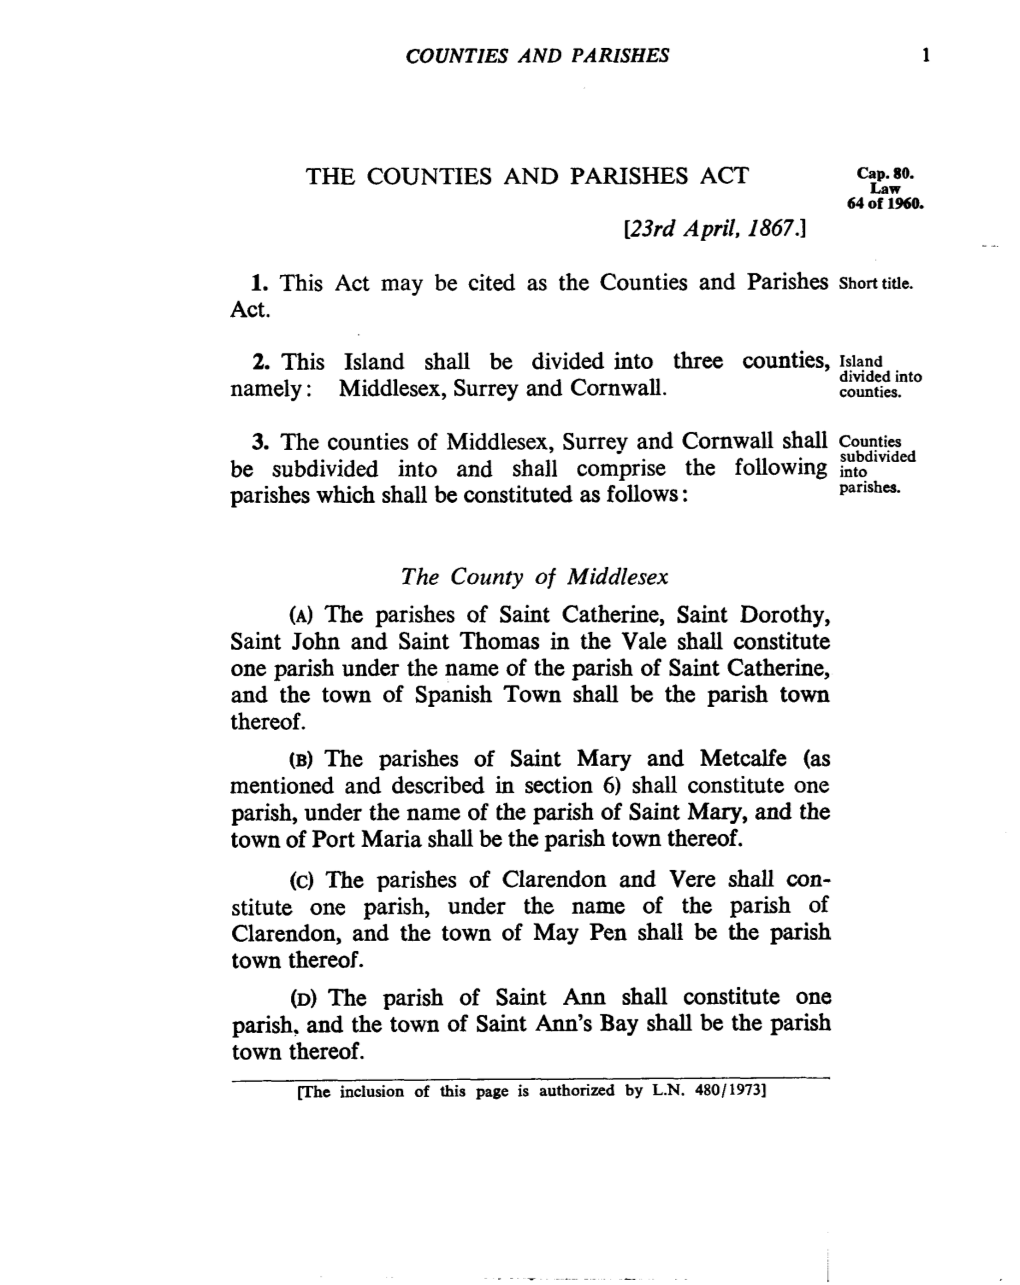 THE COUNTIES and PARISHES ACT Law 64 of 1960